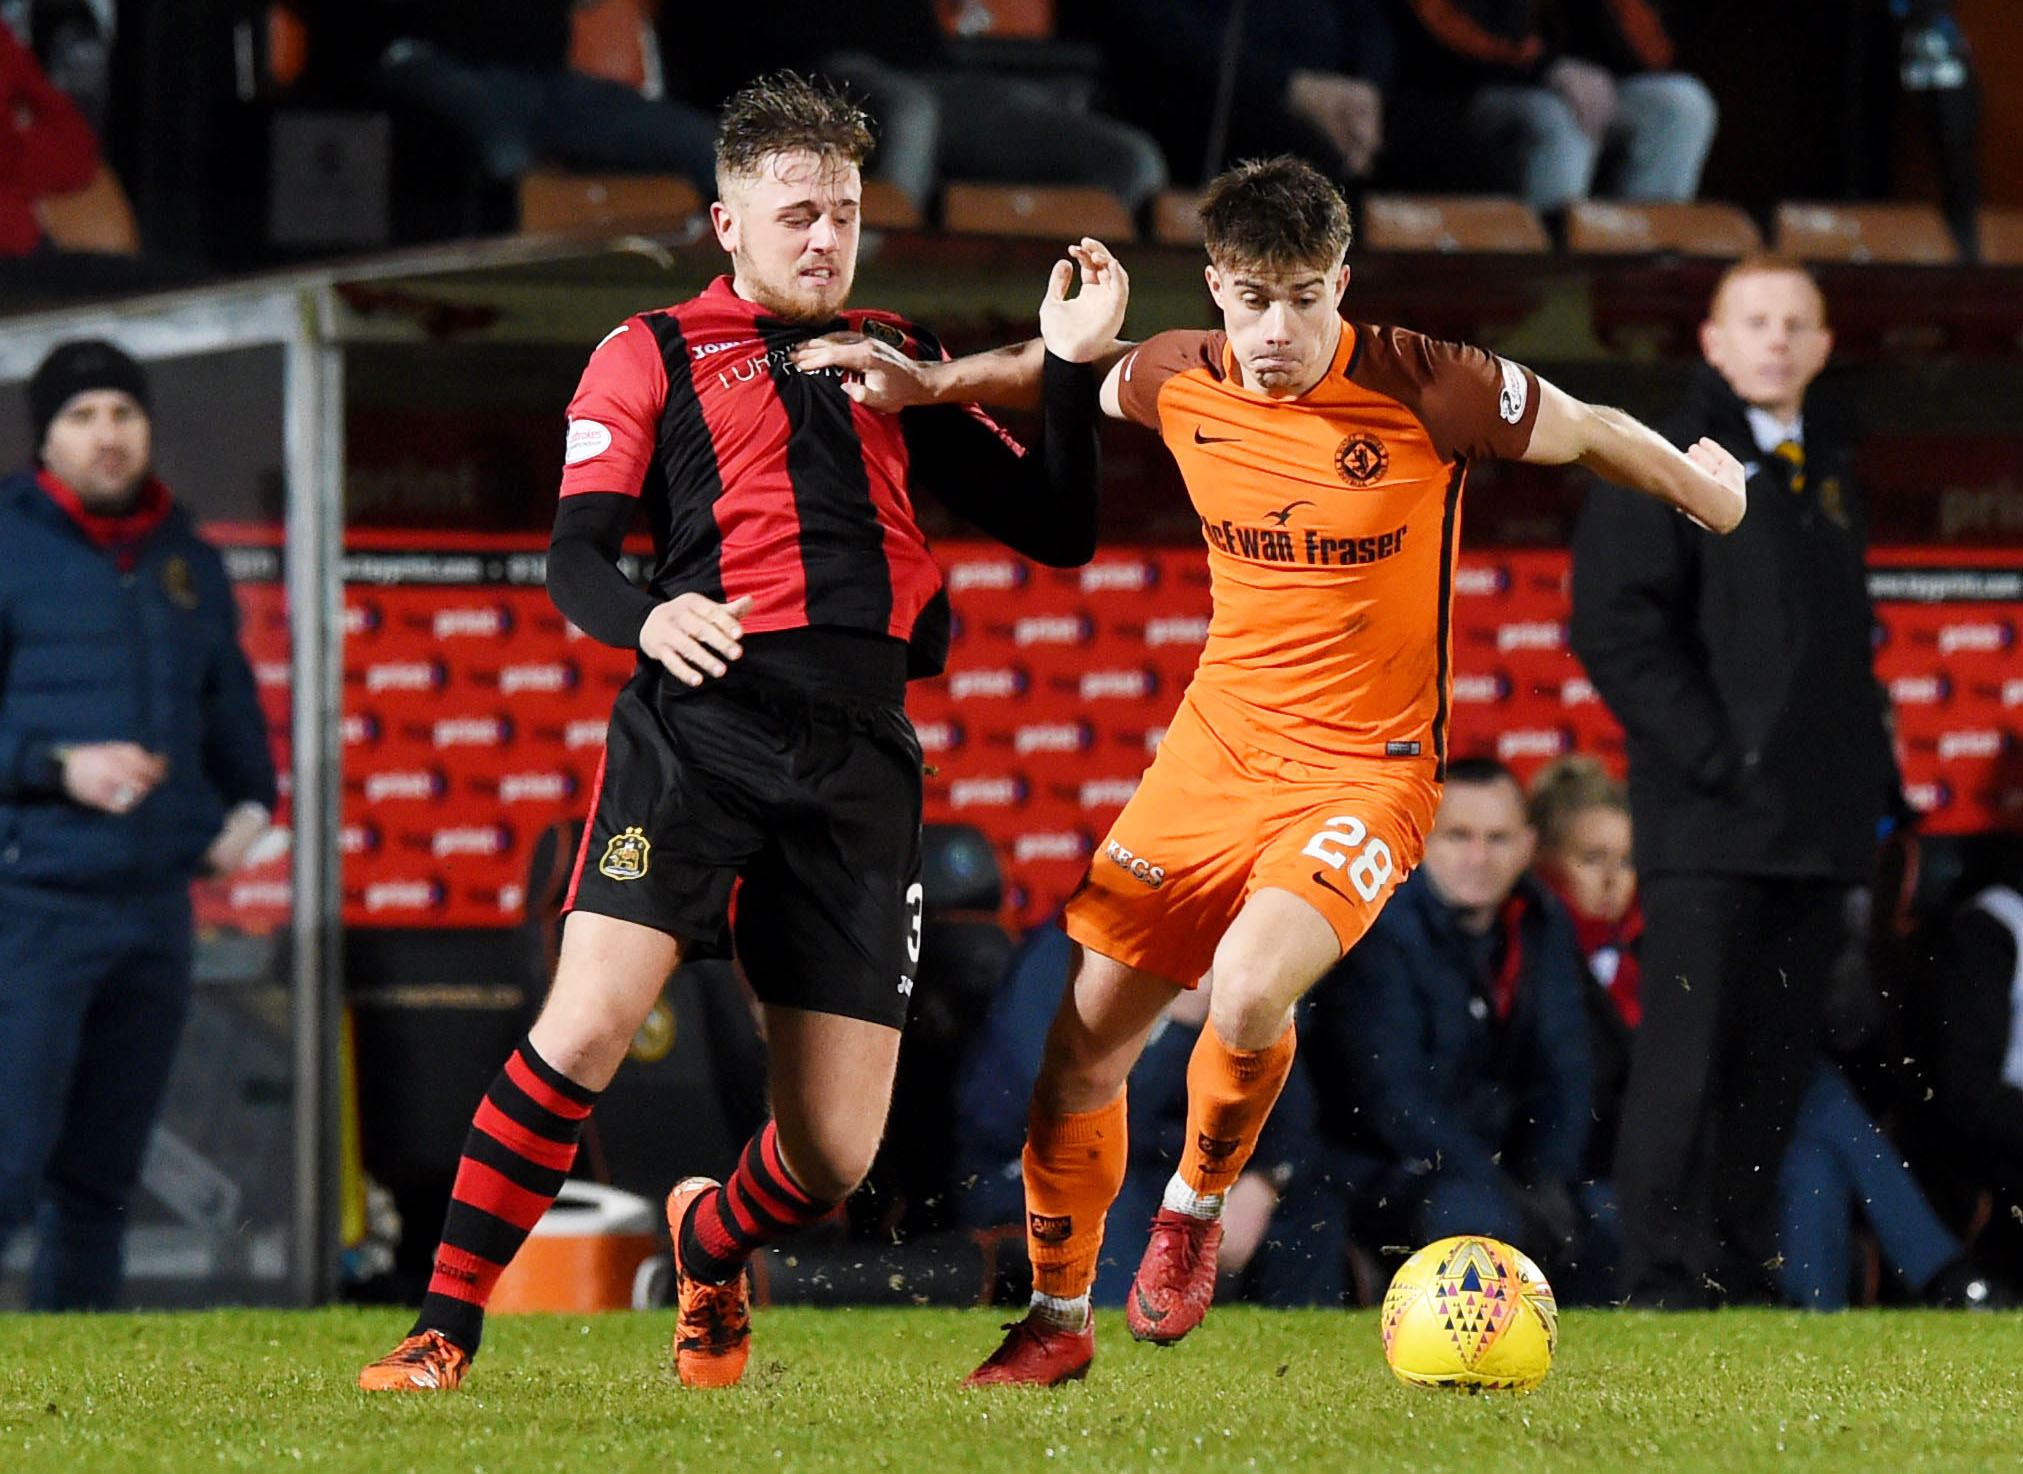 Dundee United striker Matty Smith has joined Cove Rangers